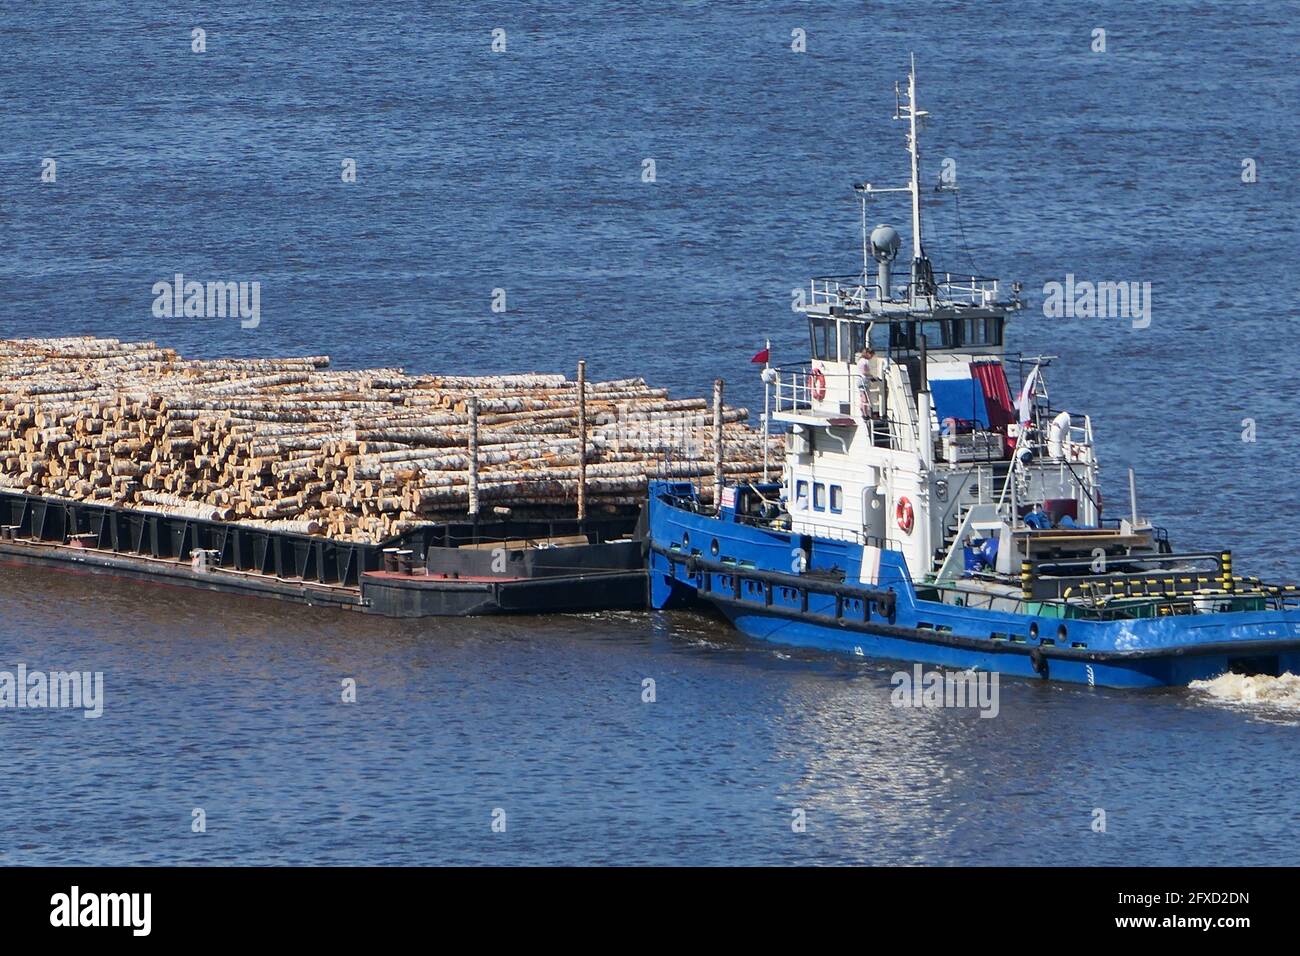 The barge transports cargo, timber logs along the river in summer. Stock Photo